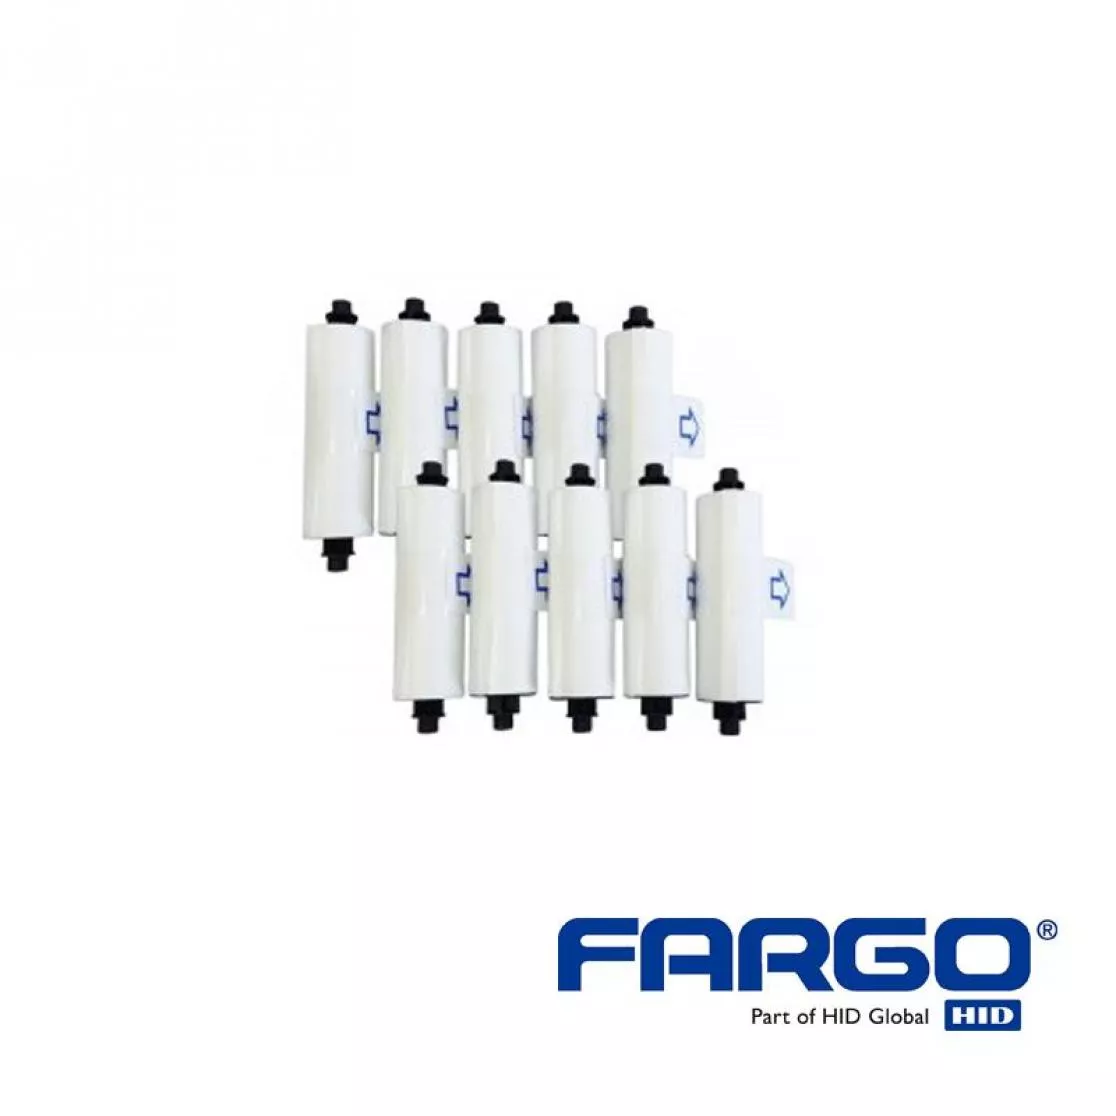 Cleaning roller for hid fargo hdp5000 card printer